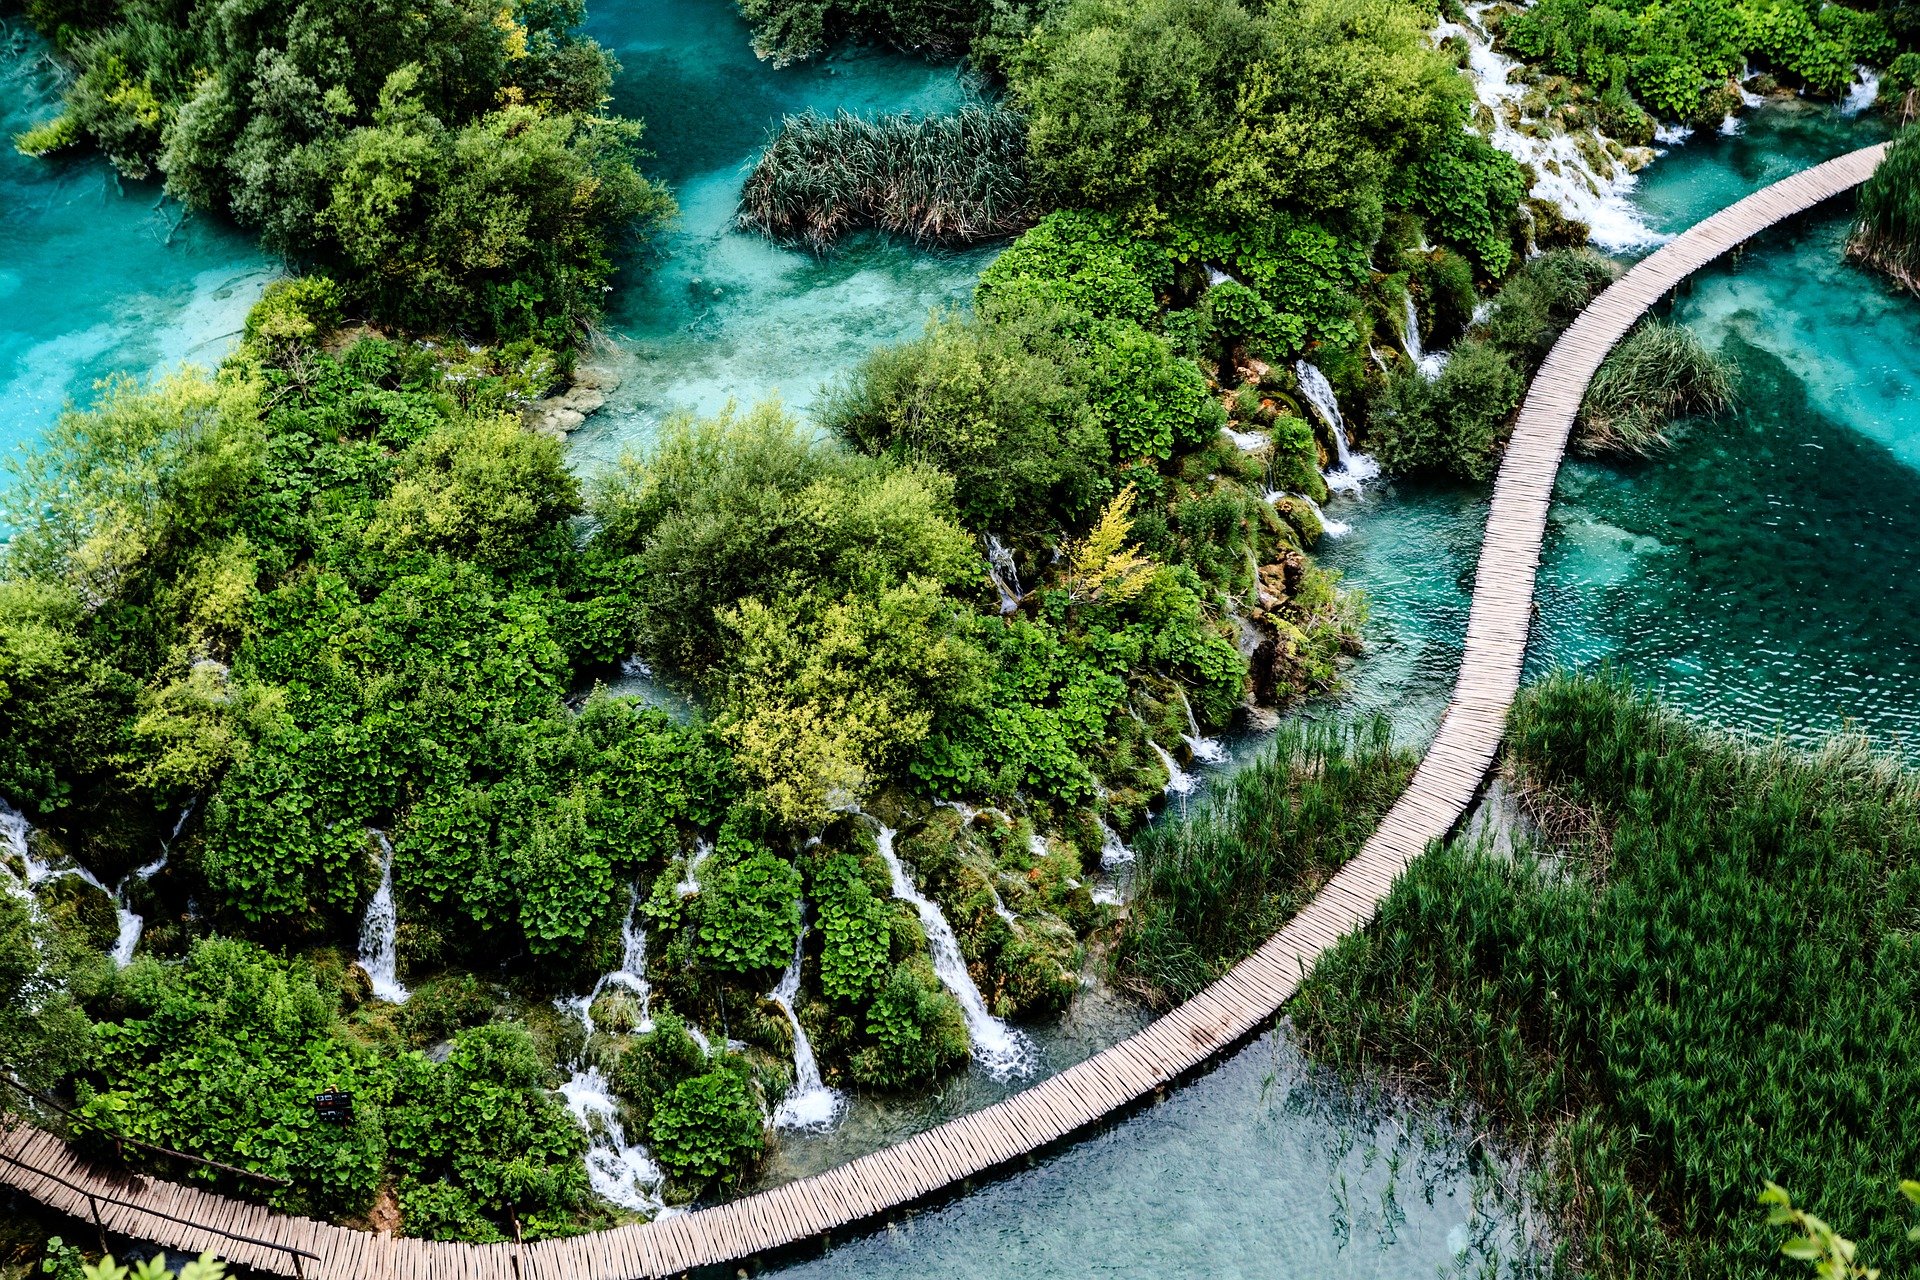 Lakes and greenery from above at Plitvice Lakes